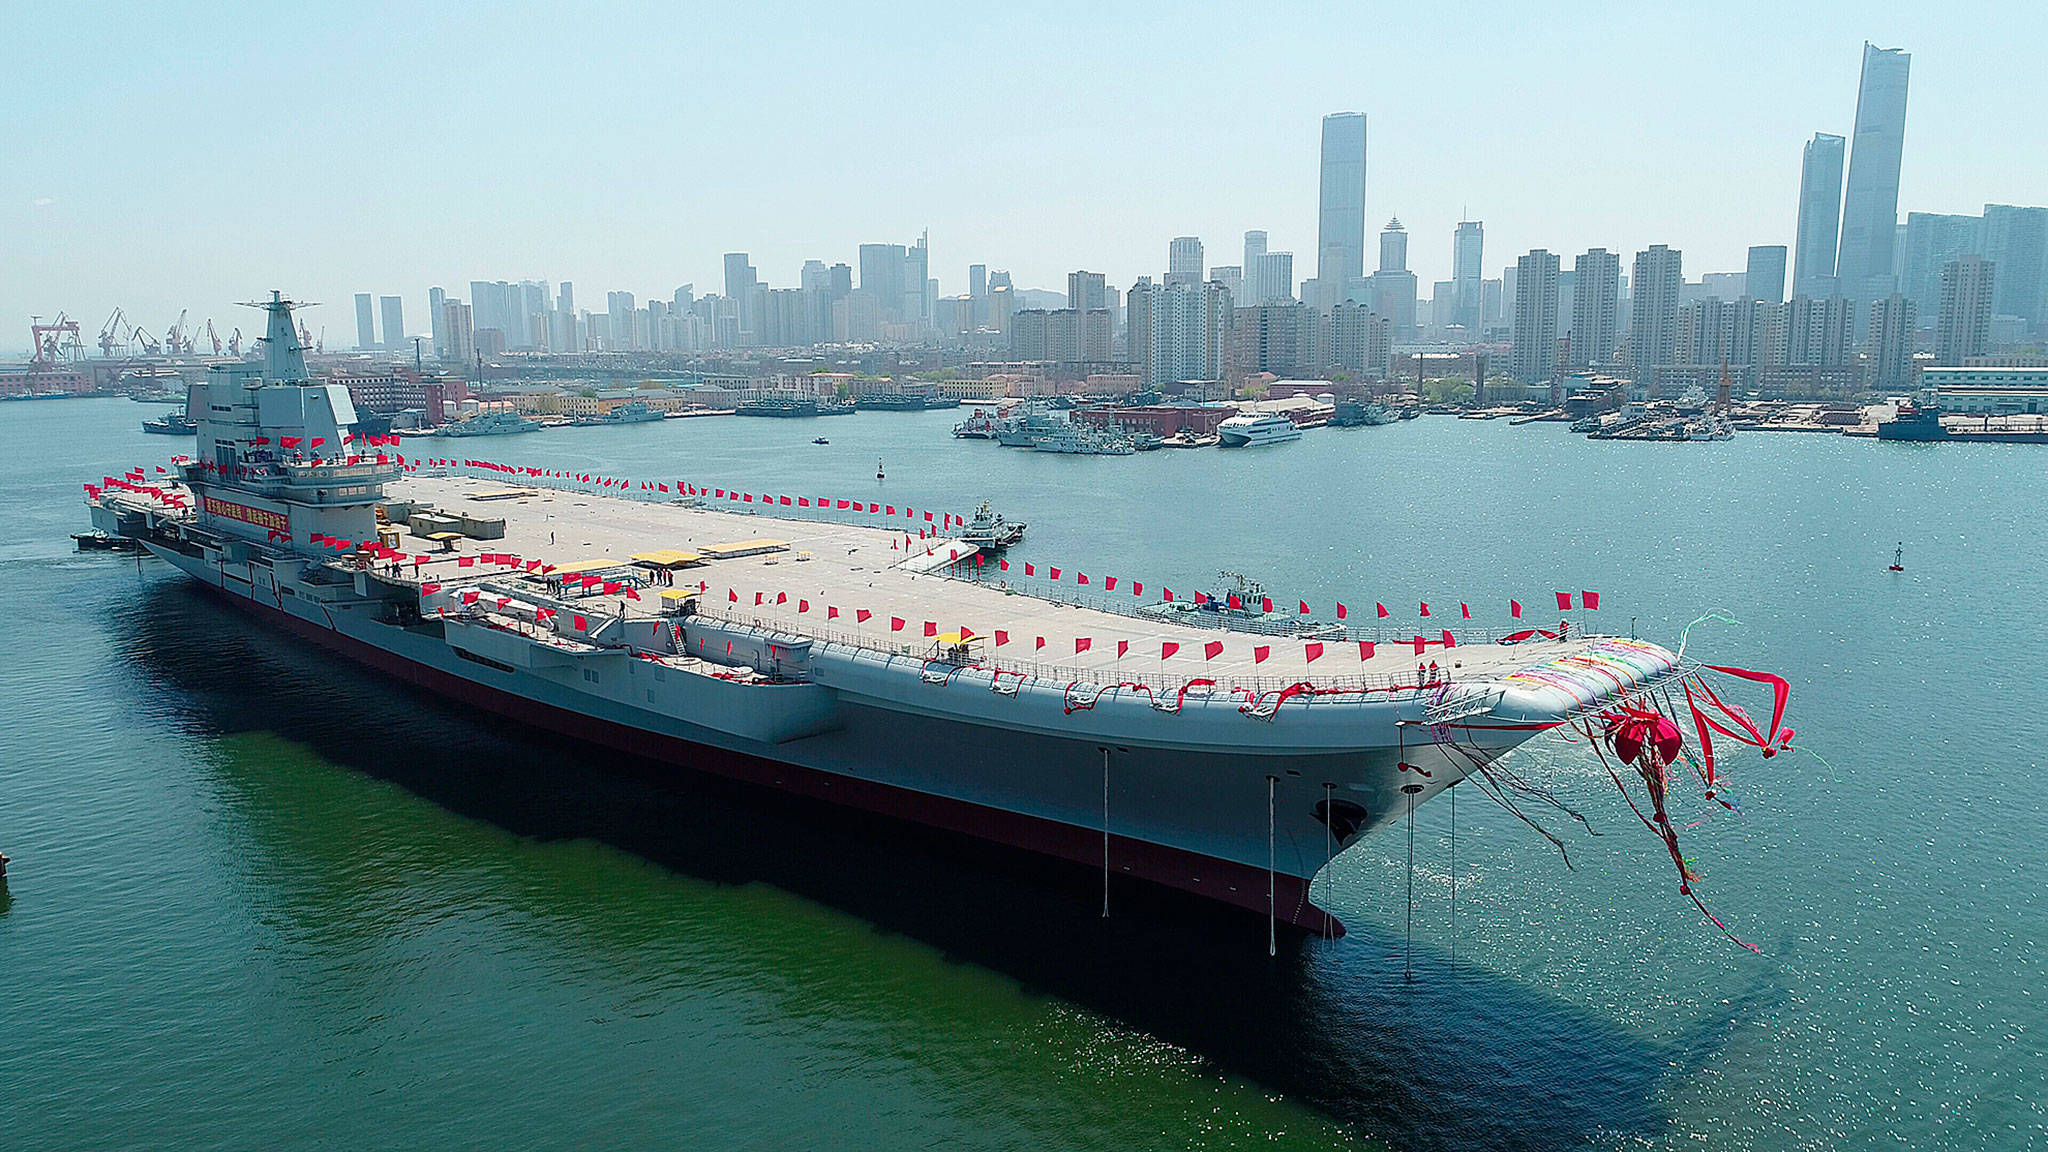 A new aircraft carrier is transferred from dry dock into the water in Dalian, China, on Wednesday. (Li Gang/Xinhua)